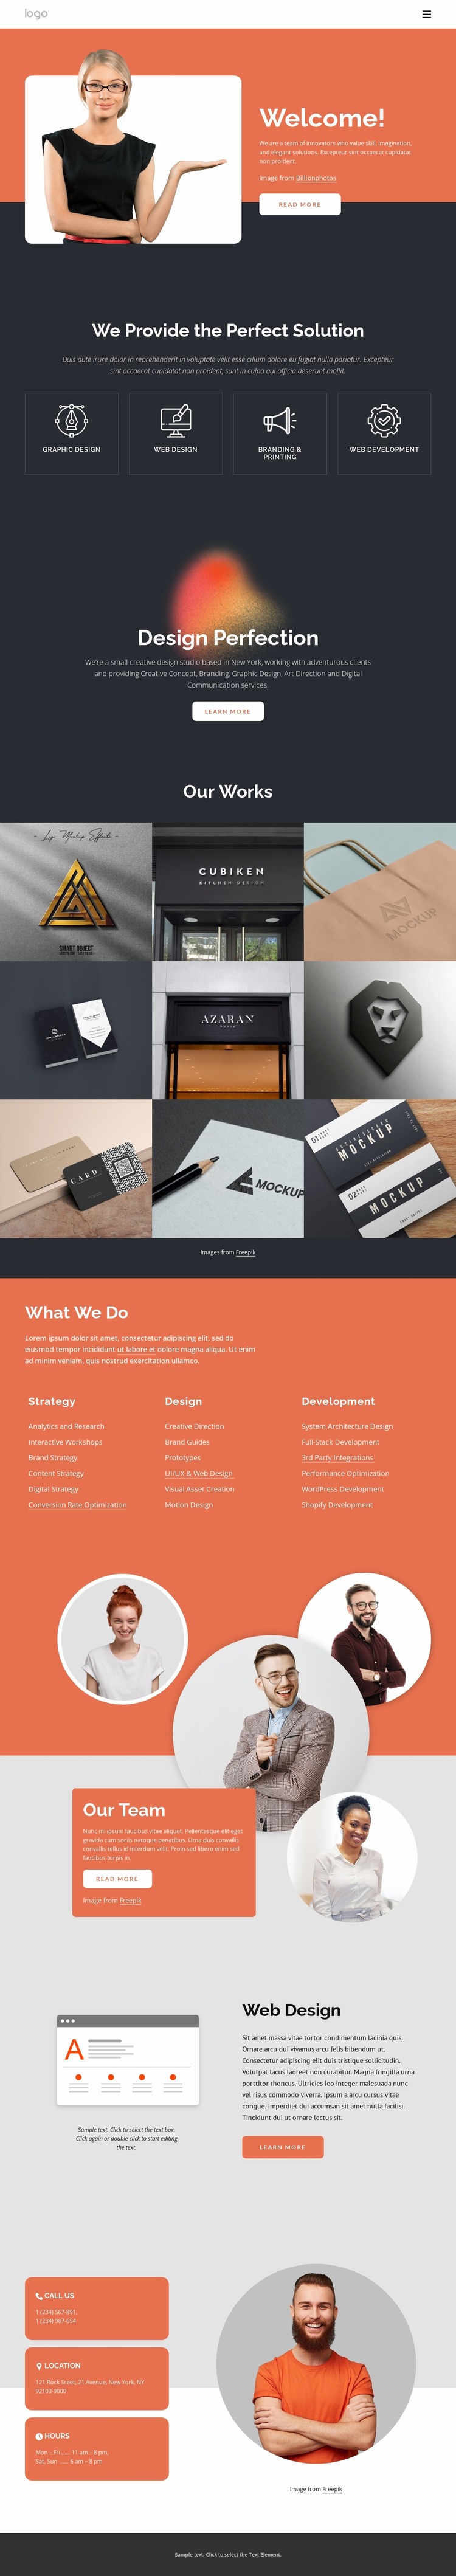 Perfect solutions Website Mockup